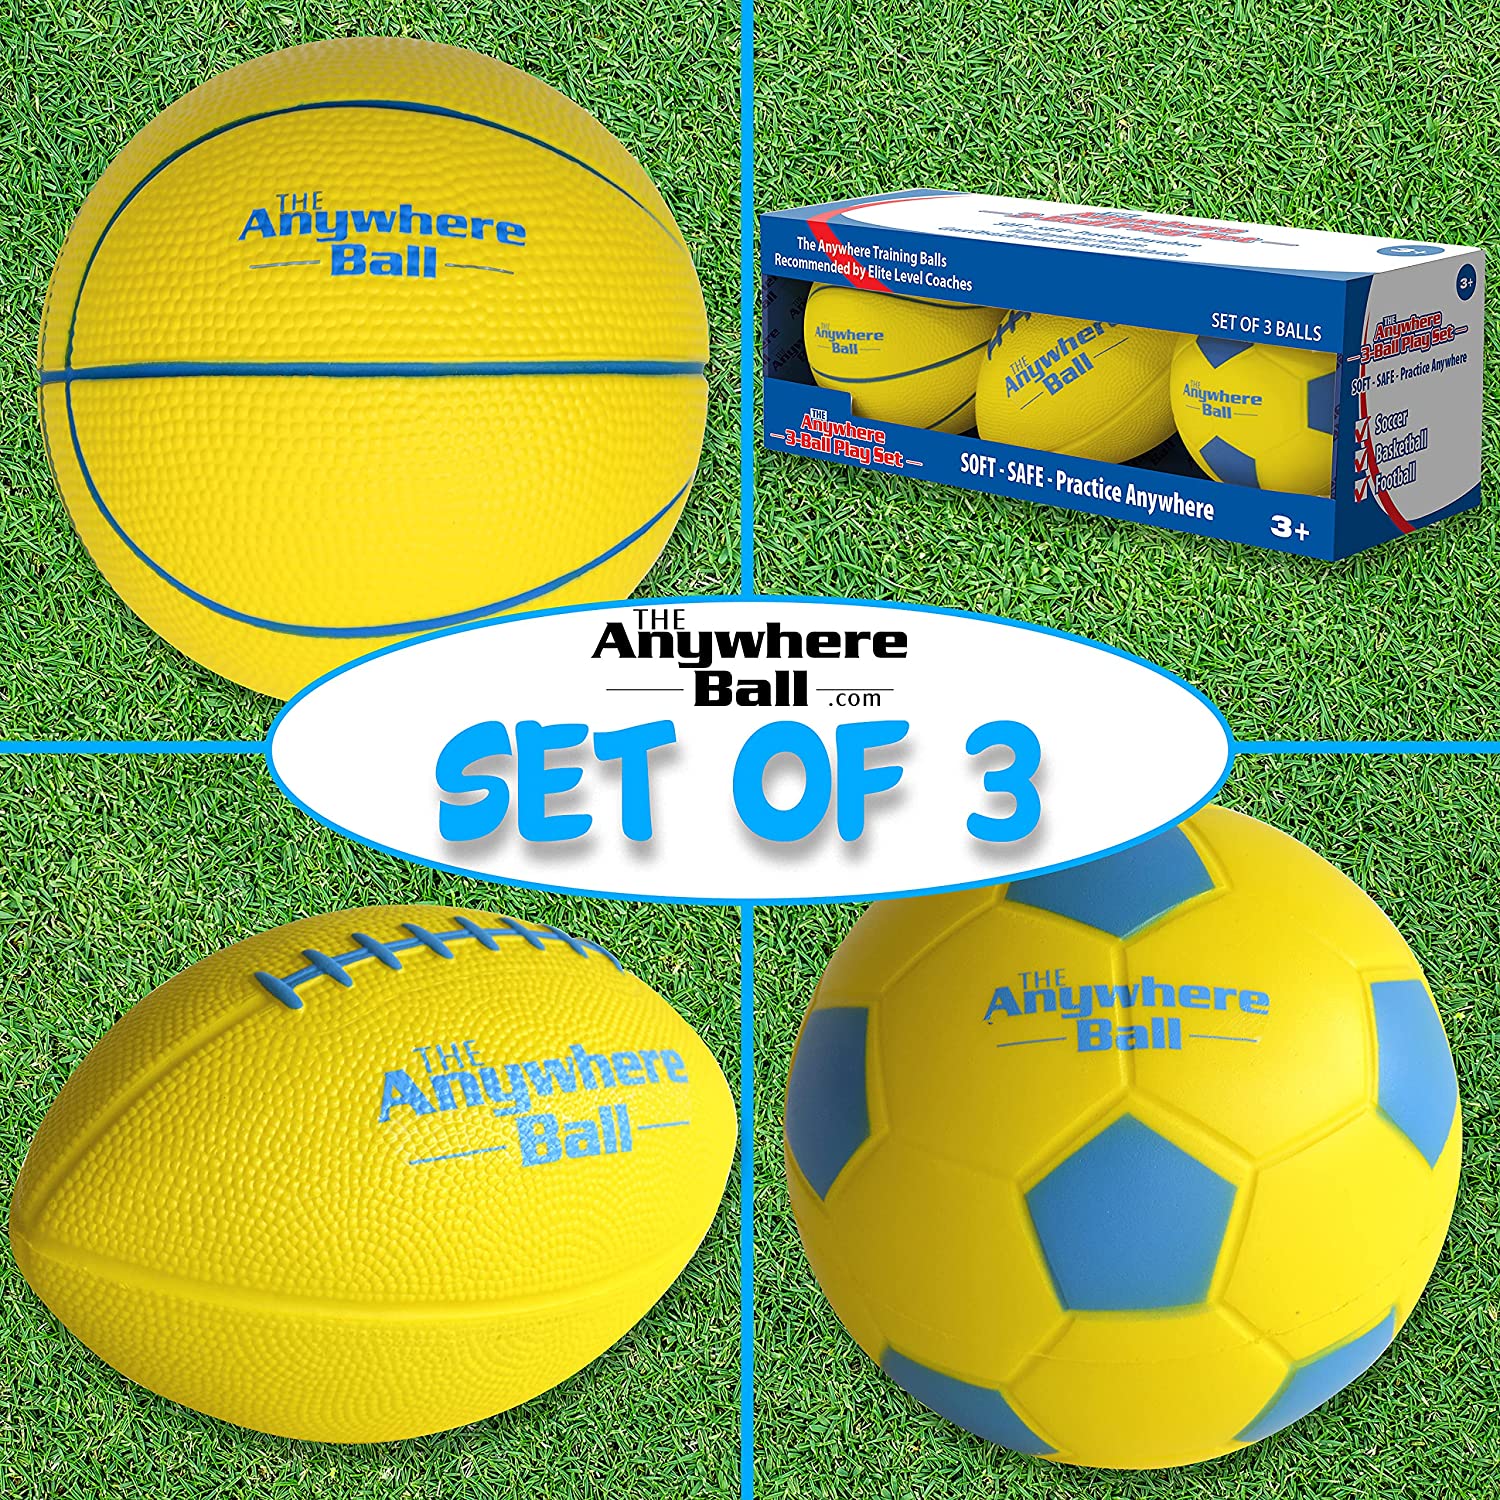 Thin Air Brands The Anywhere Ball - 3 Ball Sport Set Including Football,  Soccer Ball, and Basketball